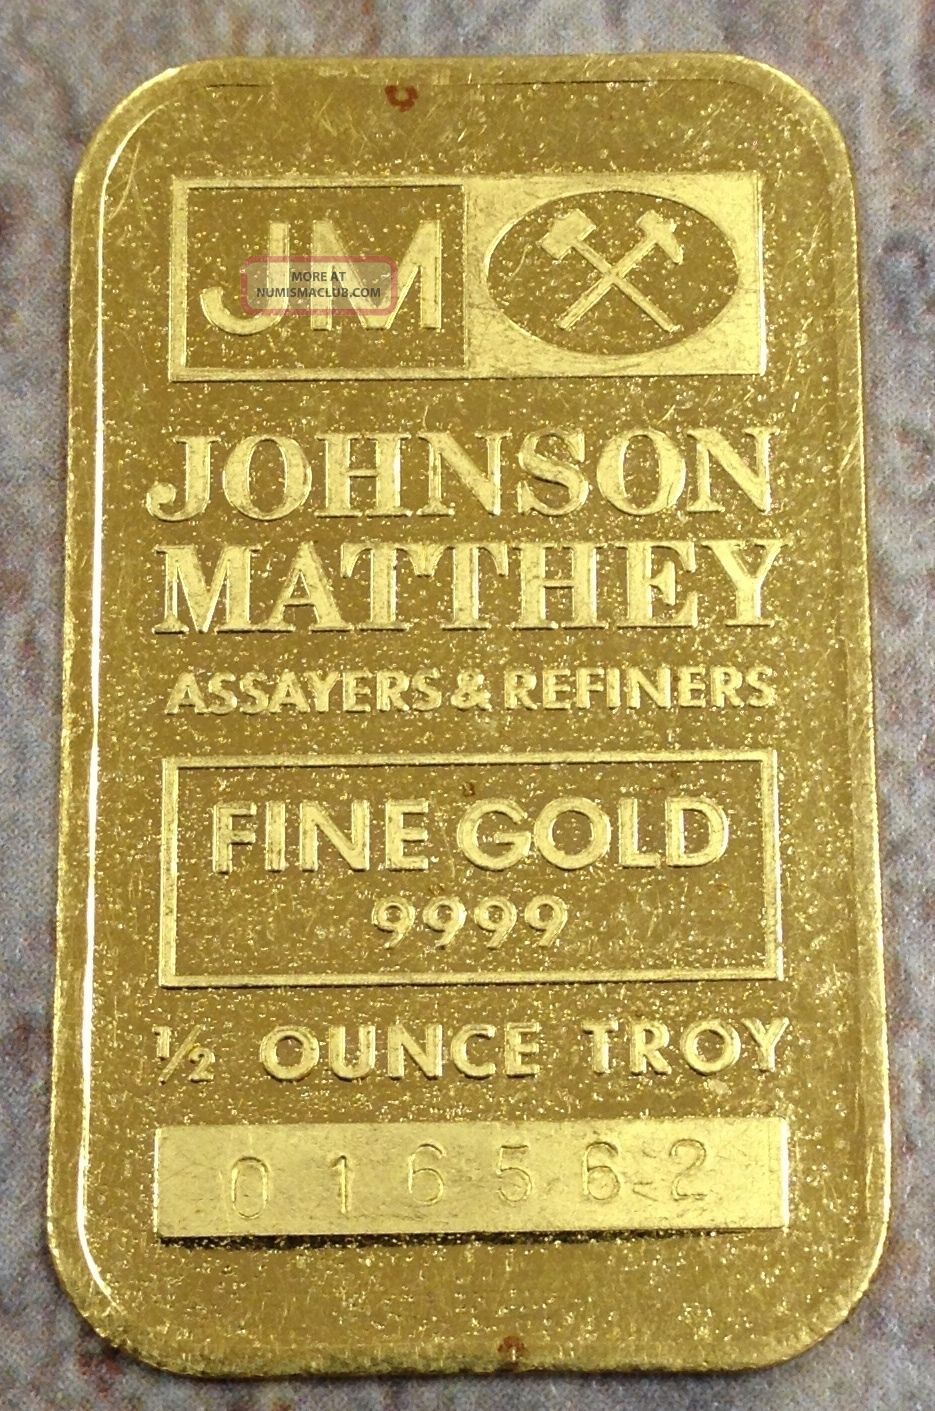 Johnson Matthey 1/2 Ounces Troy. 9999 Fine Gold Priced To Sell